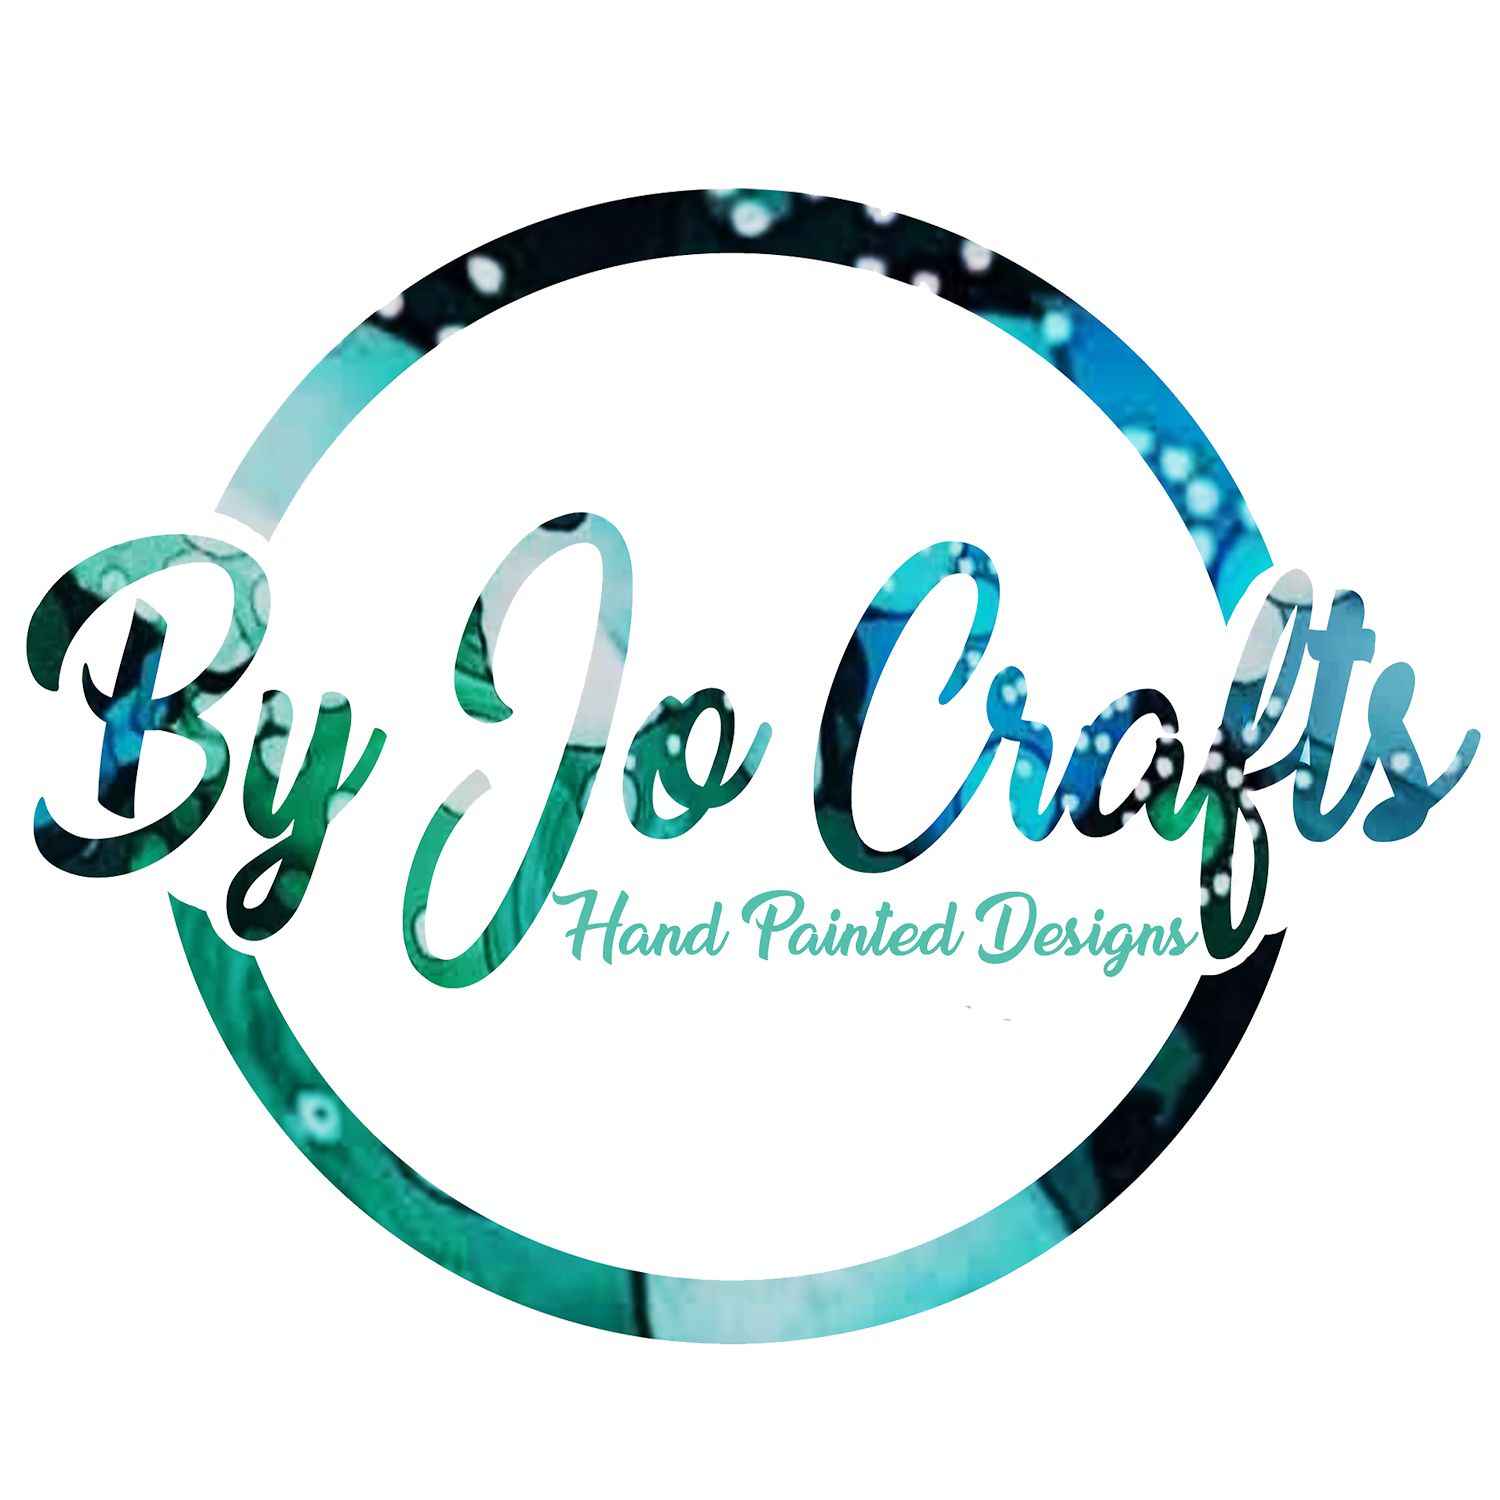 This shop is called ByJoCrafts 